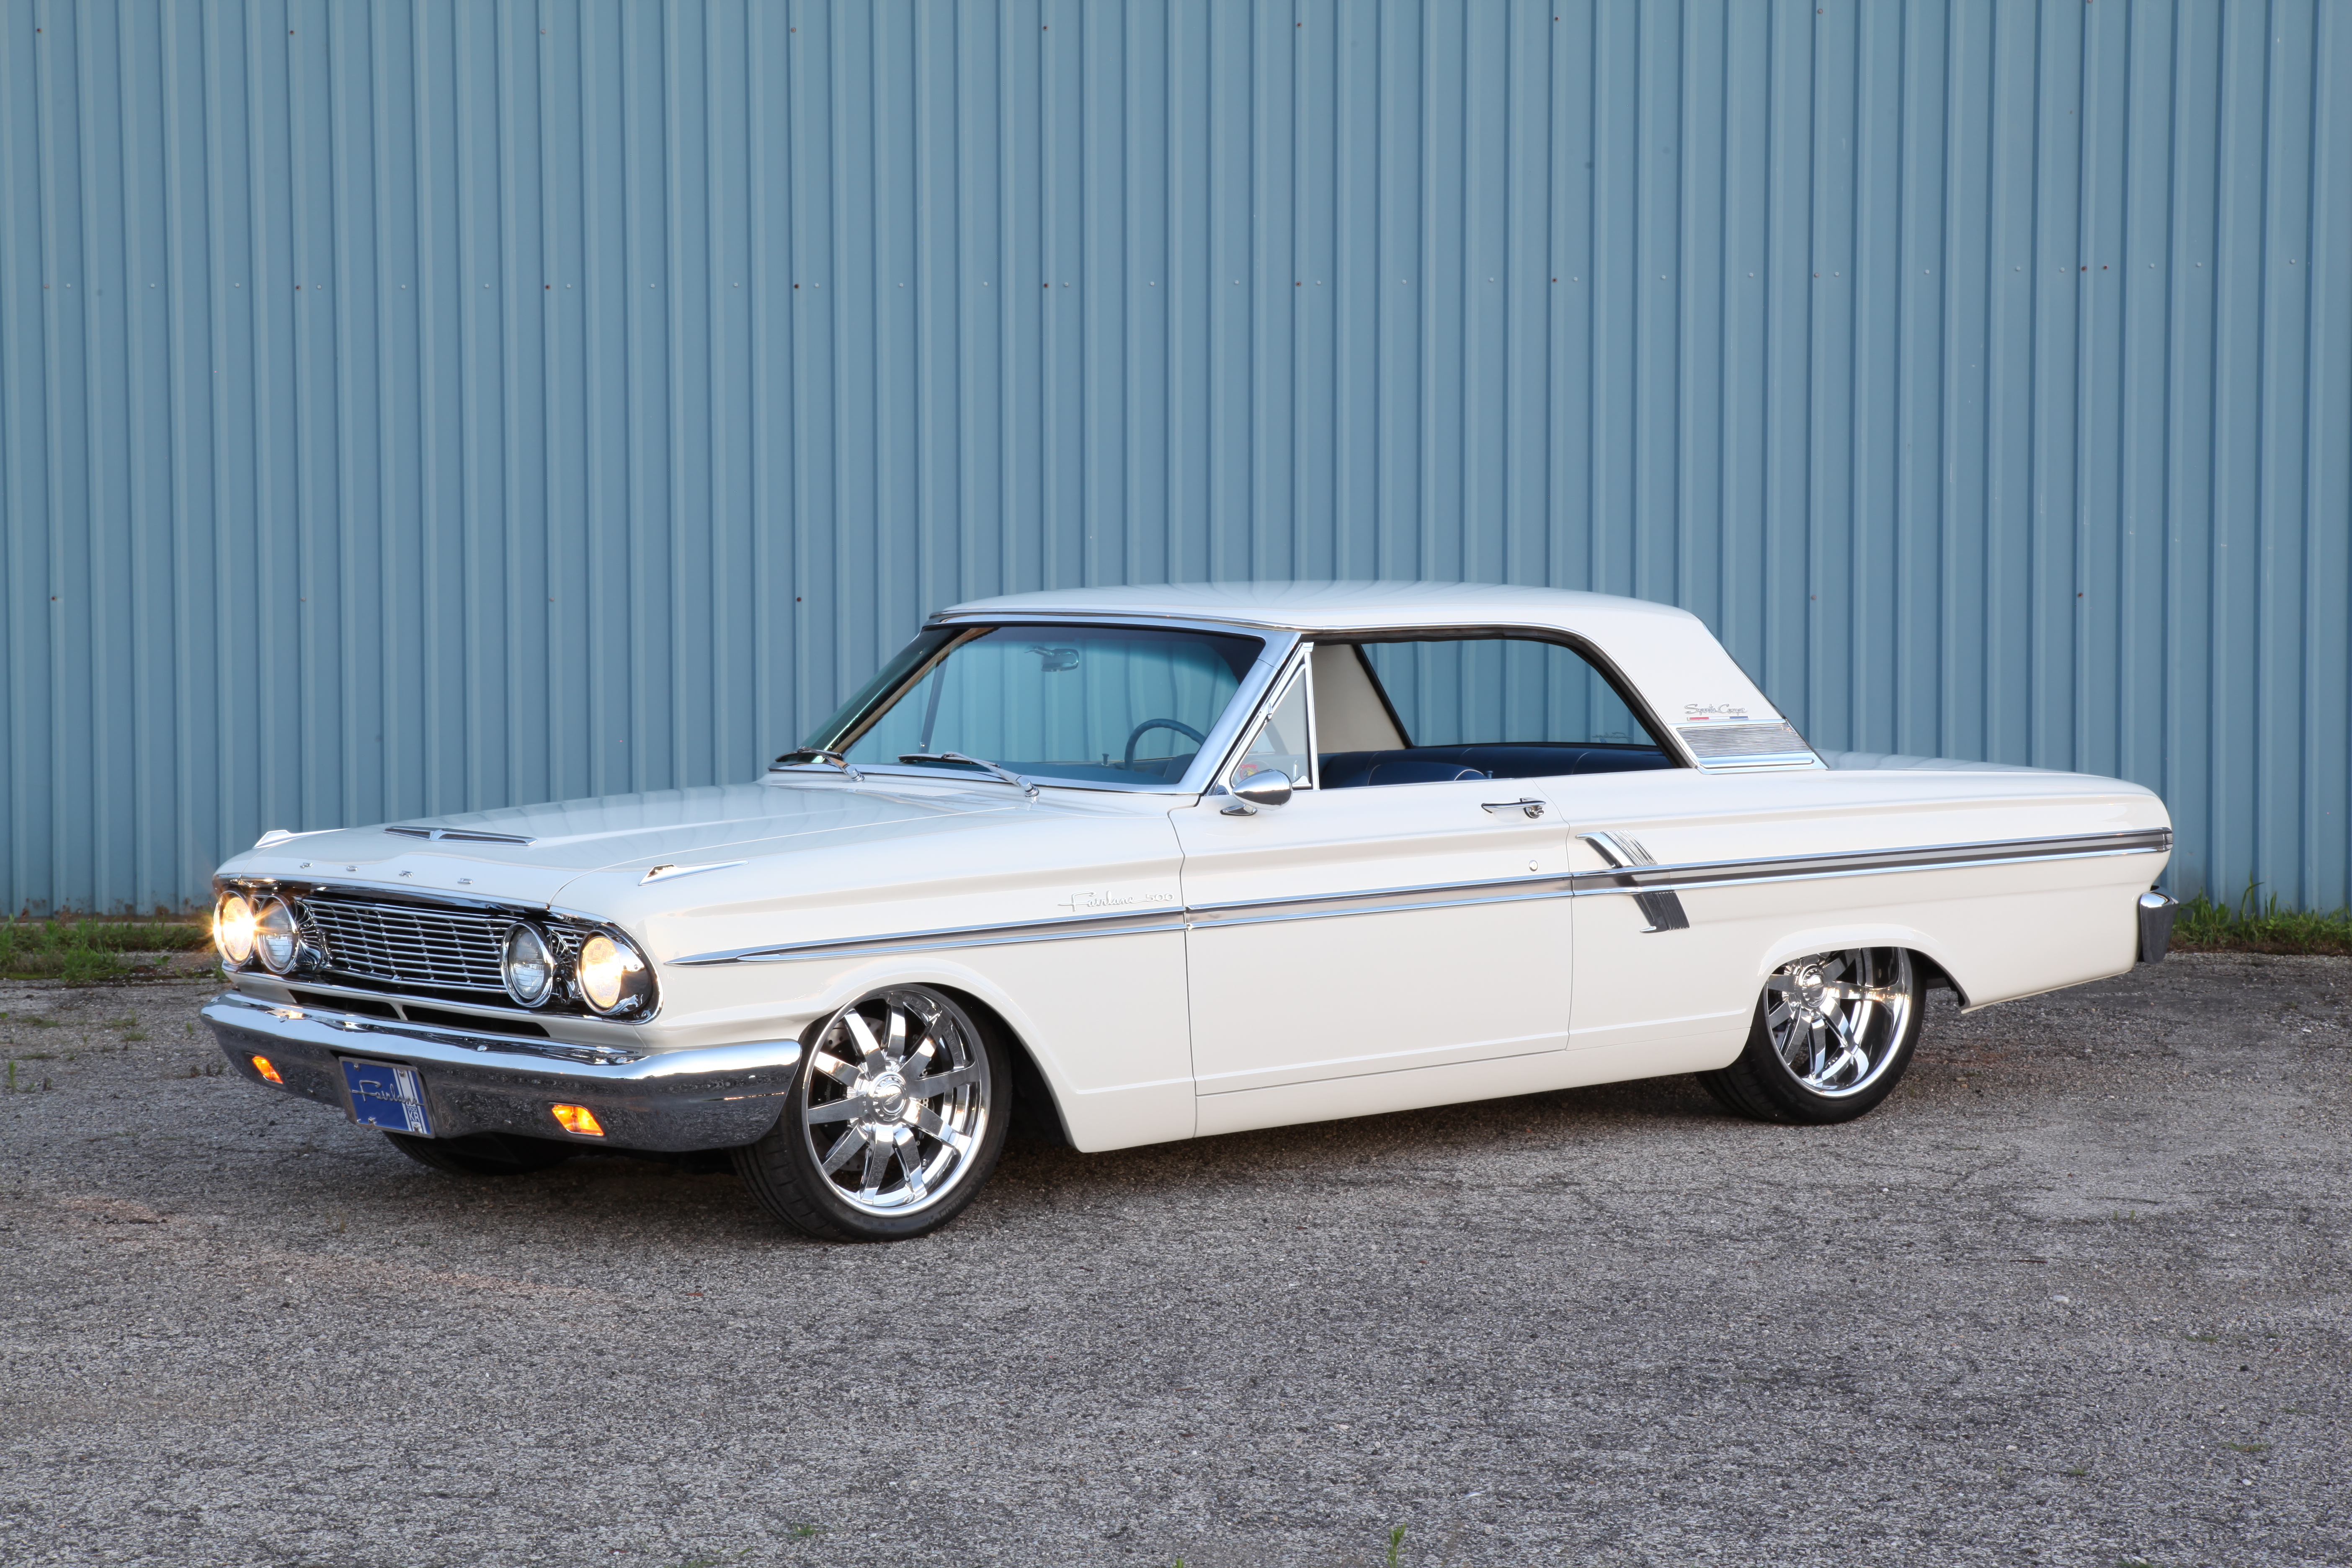 Amazing 1964 Ford Fairlane Pictures & Backgrounds